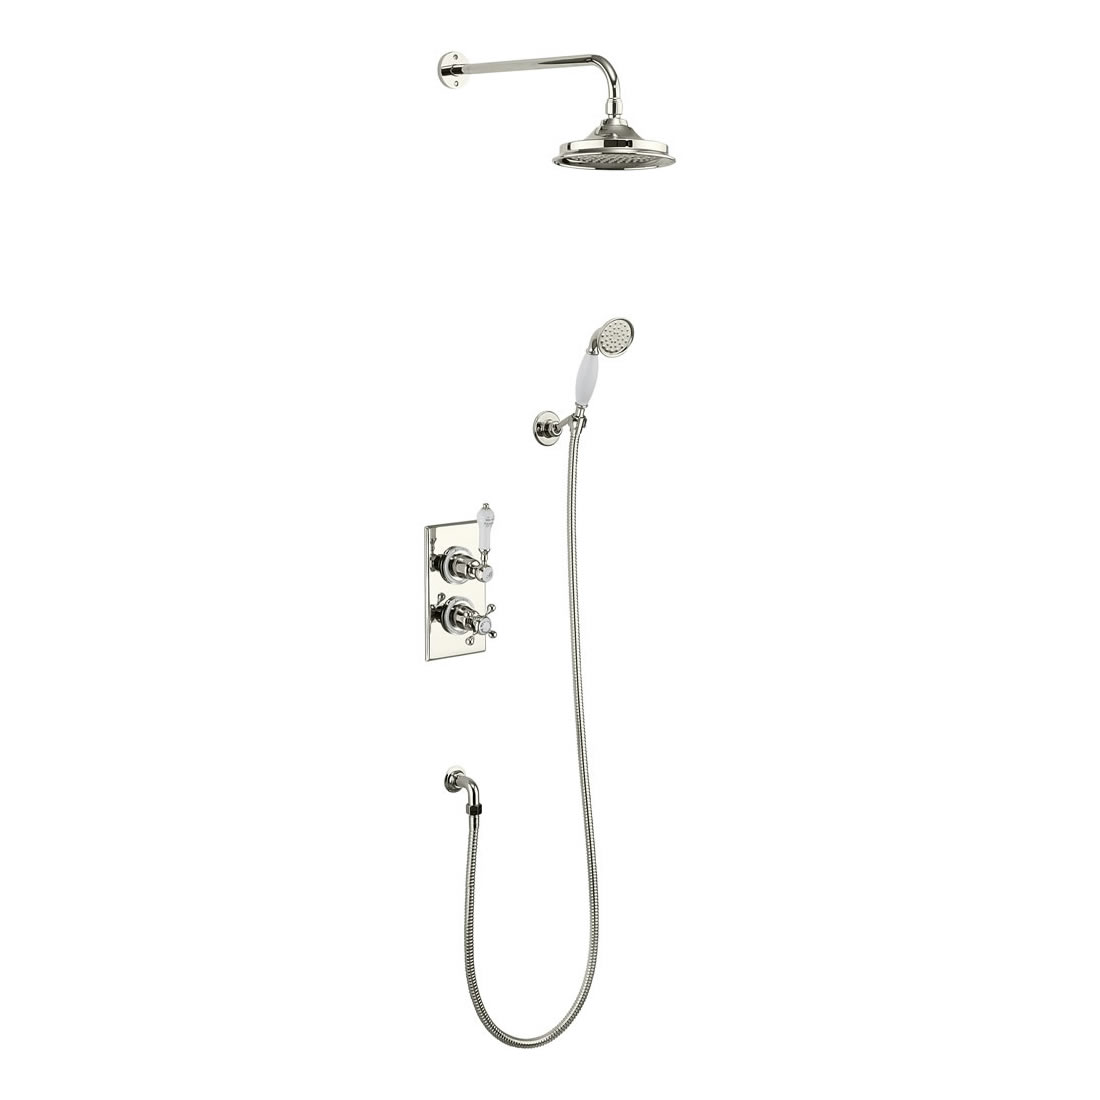 Trent Thermostatic Two Outlet Concealed Divertor  Shower Valve , Fixed Shower Arm, Handset & Holder with Hose with 9 inch rose  - NICKEL